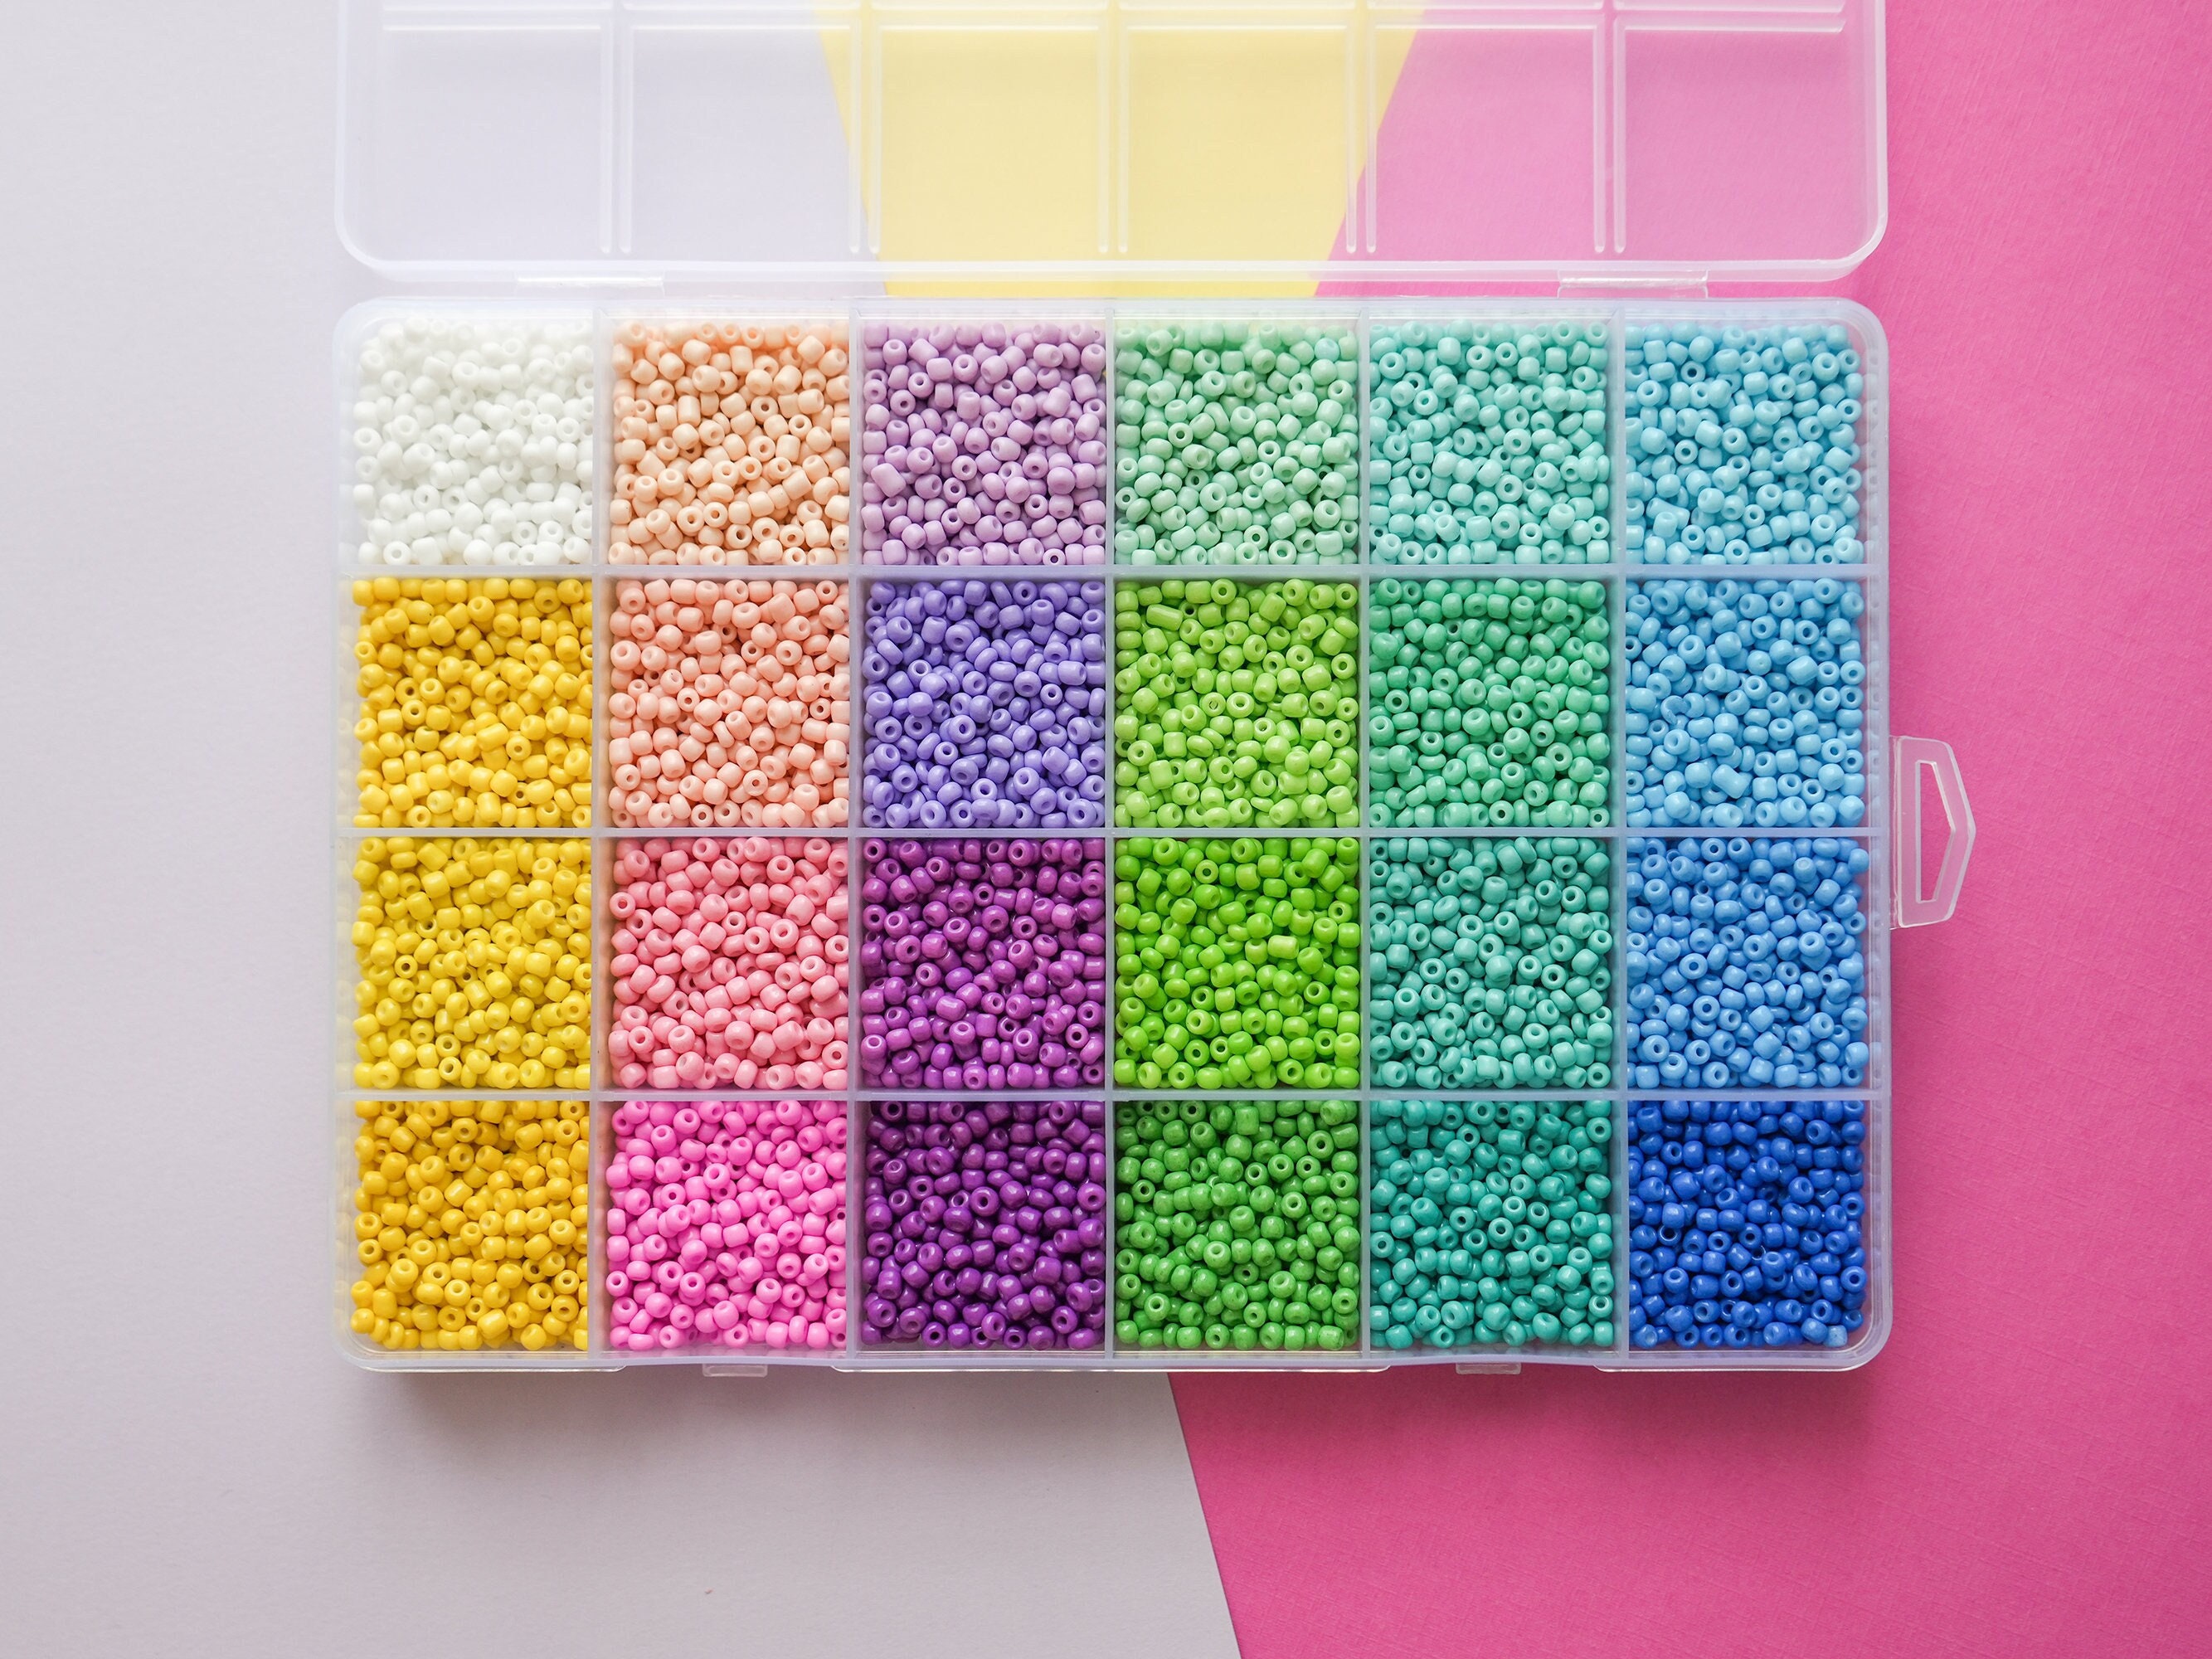 DIY Letter and Seed Bead Kit - over 12,000 pieces